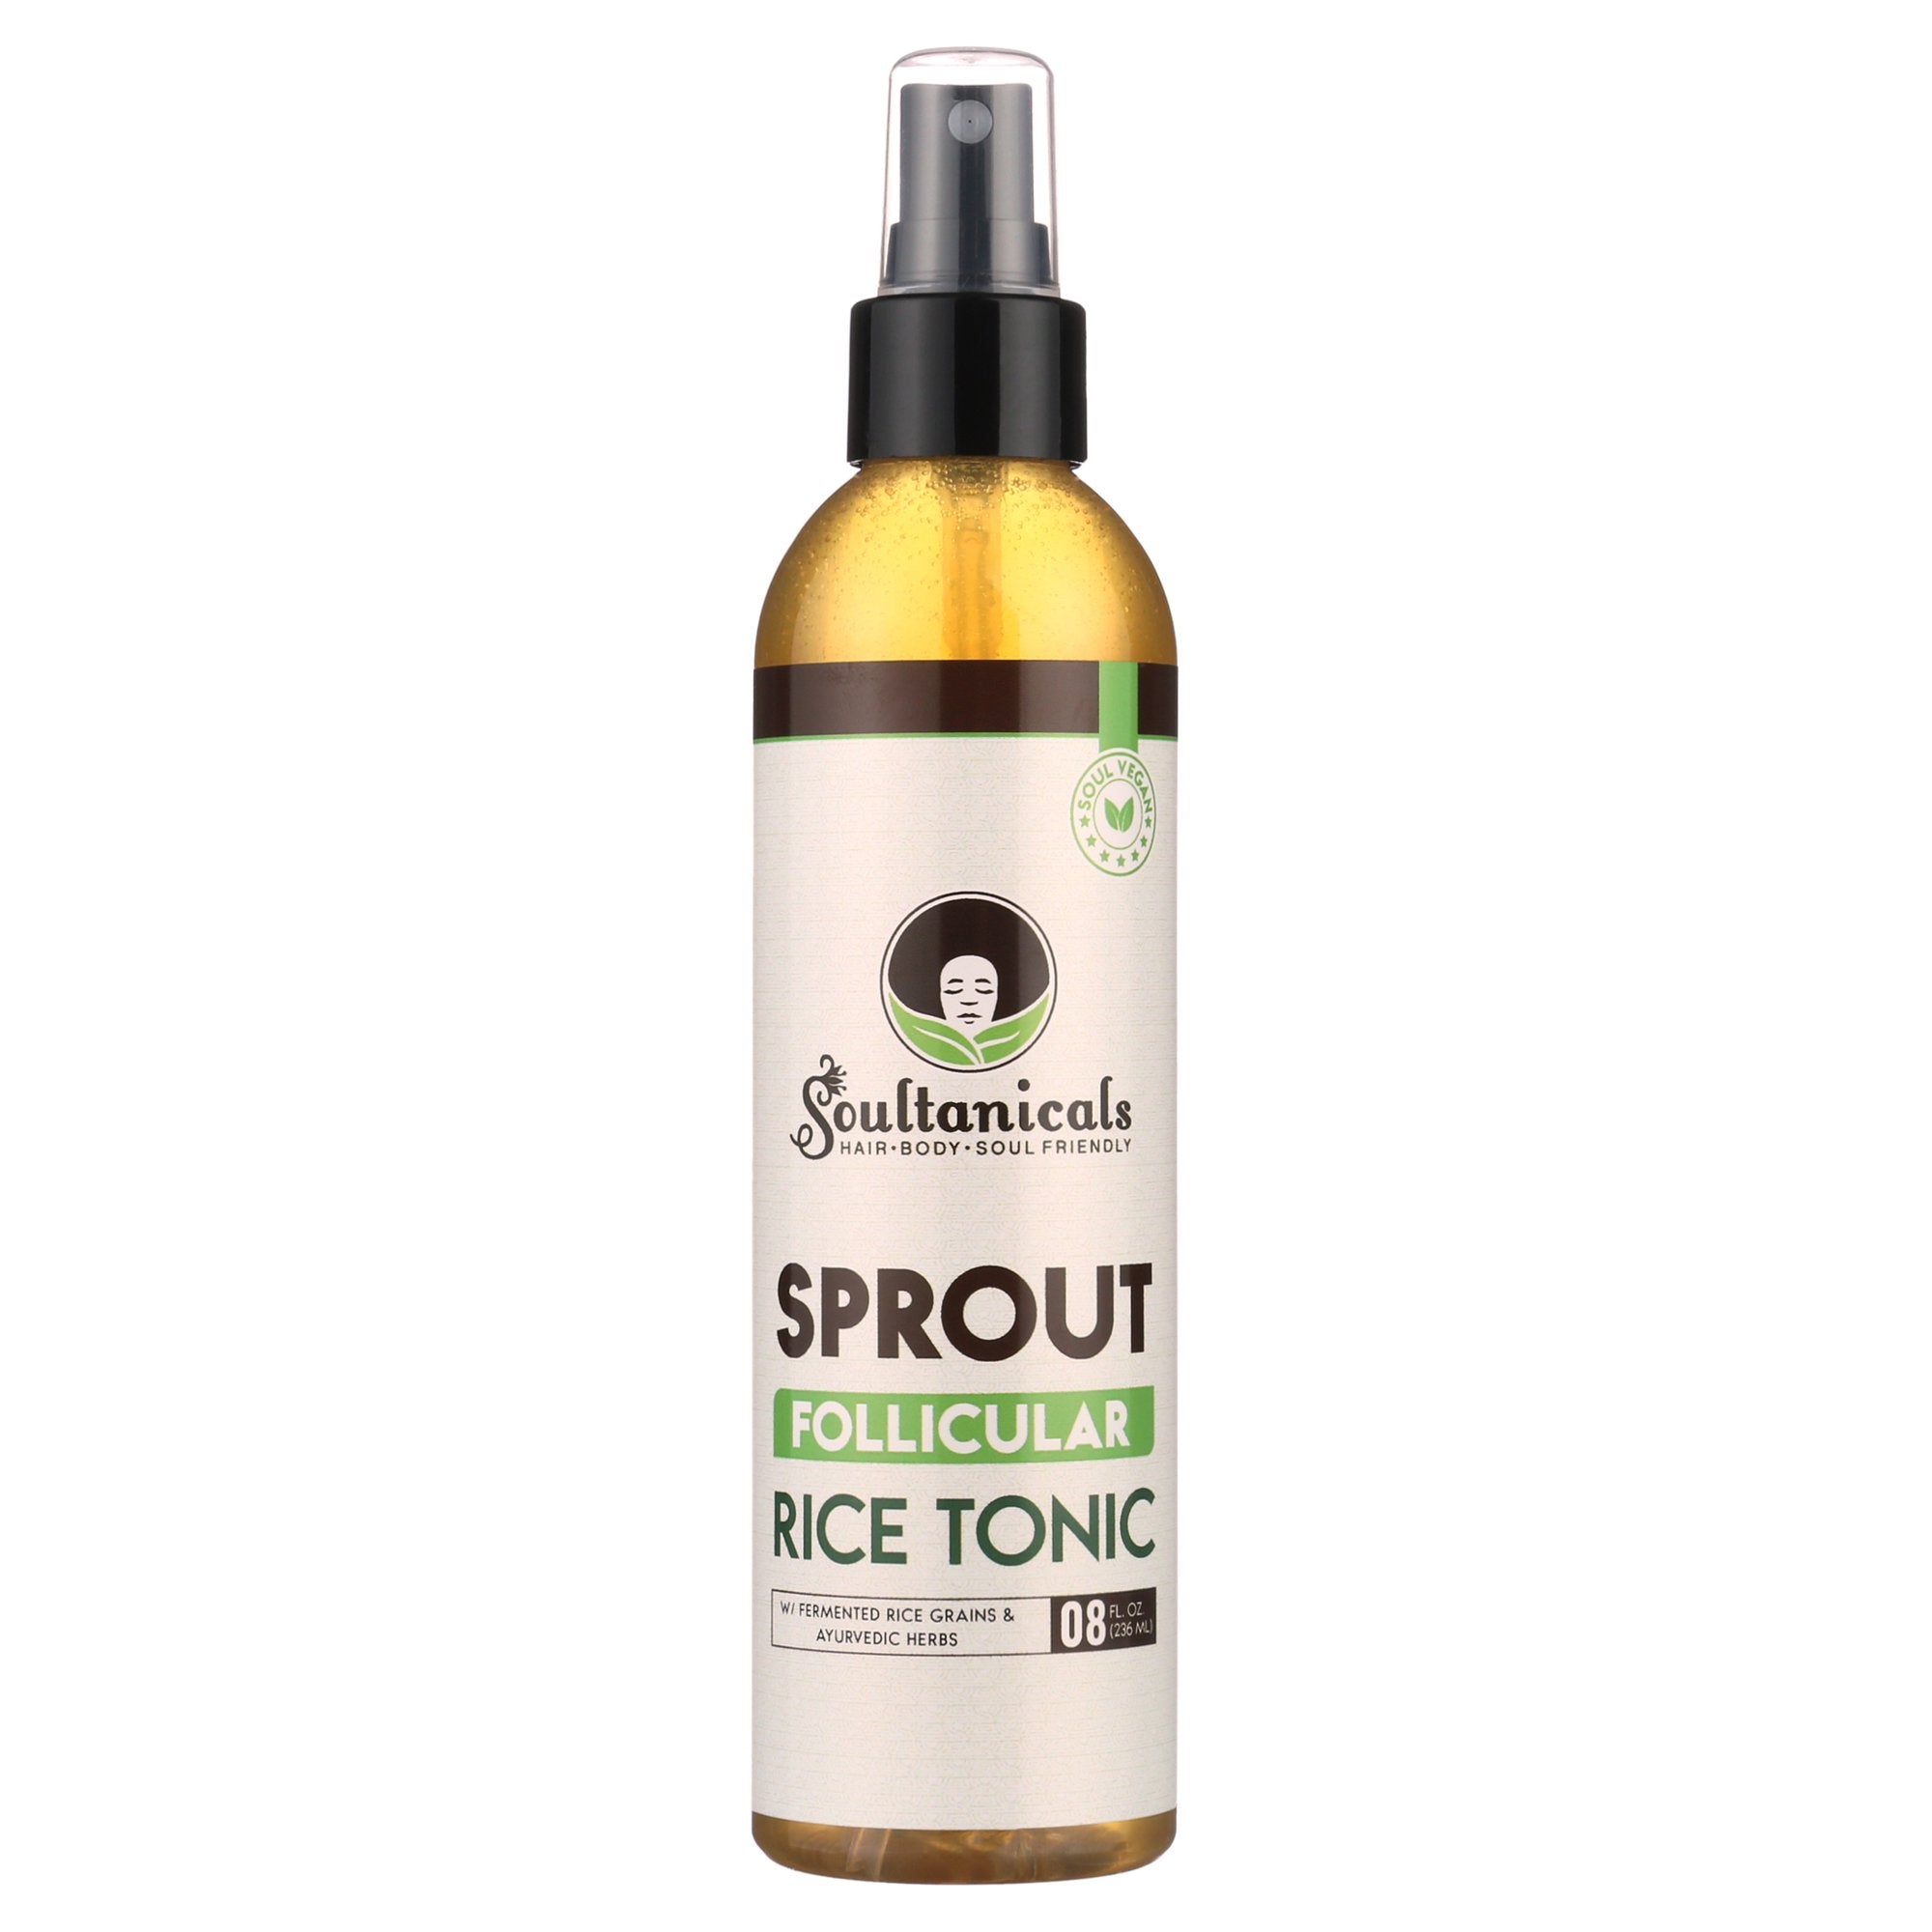 SPROUT- Follicular Rice Tonic - WHOLESALE ONLY